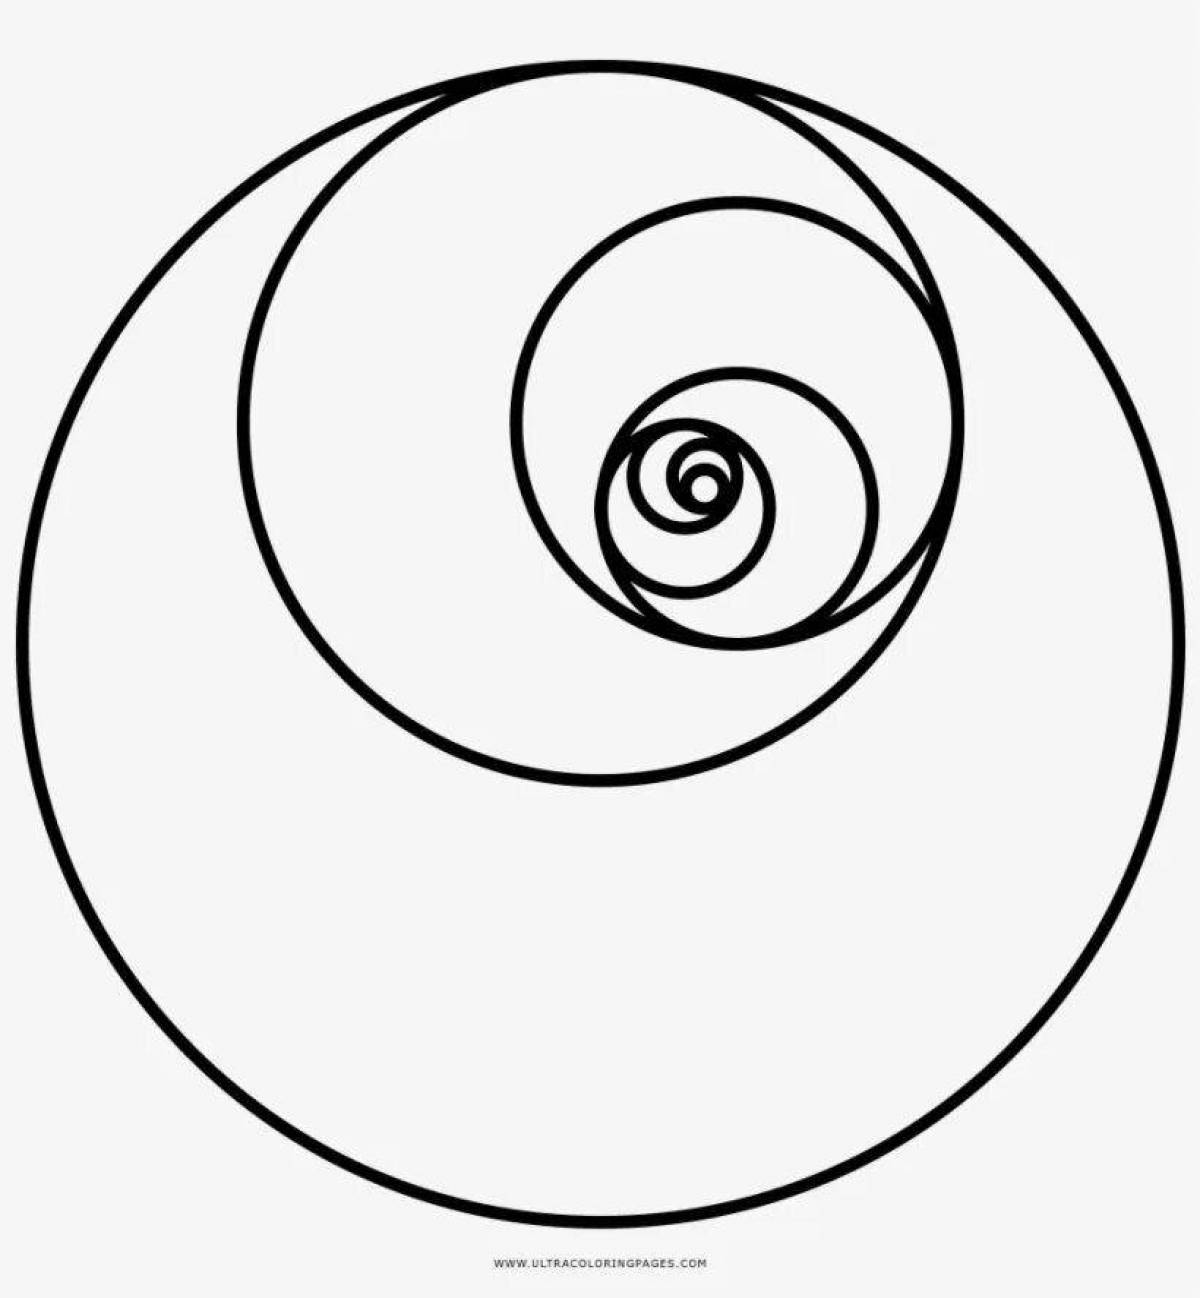 Funny spiral coloring page in a circle